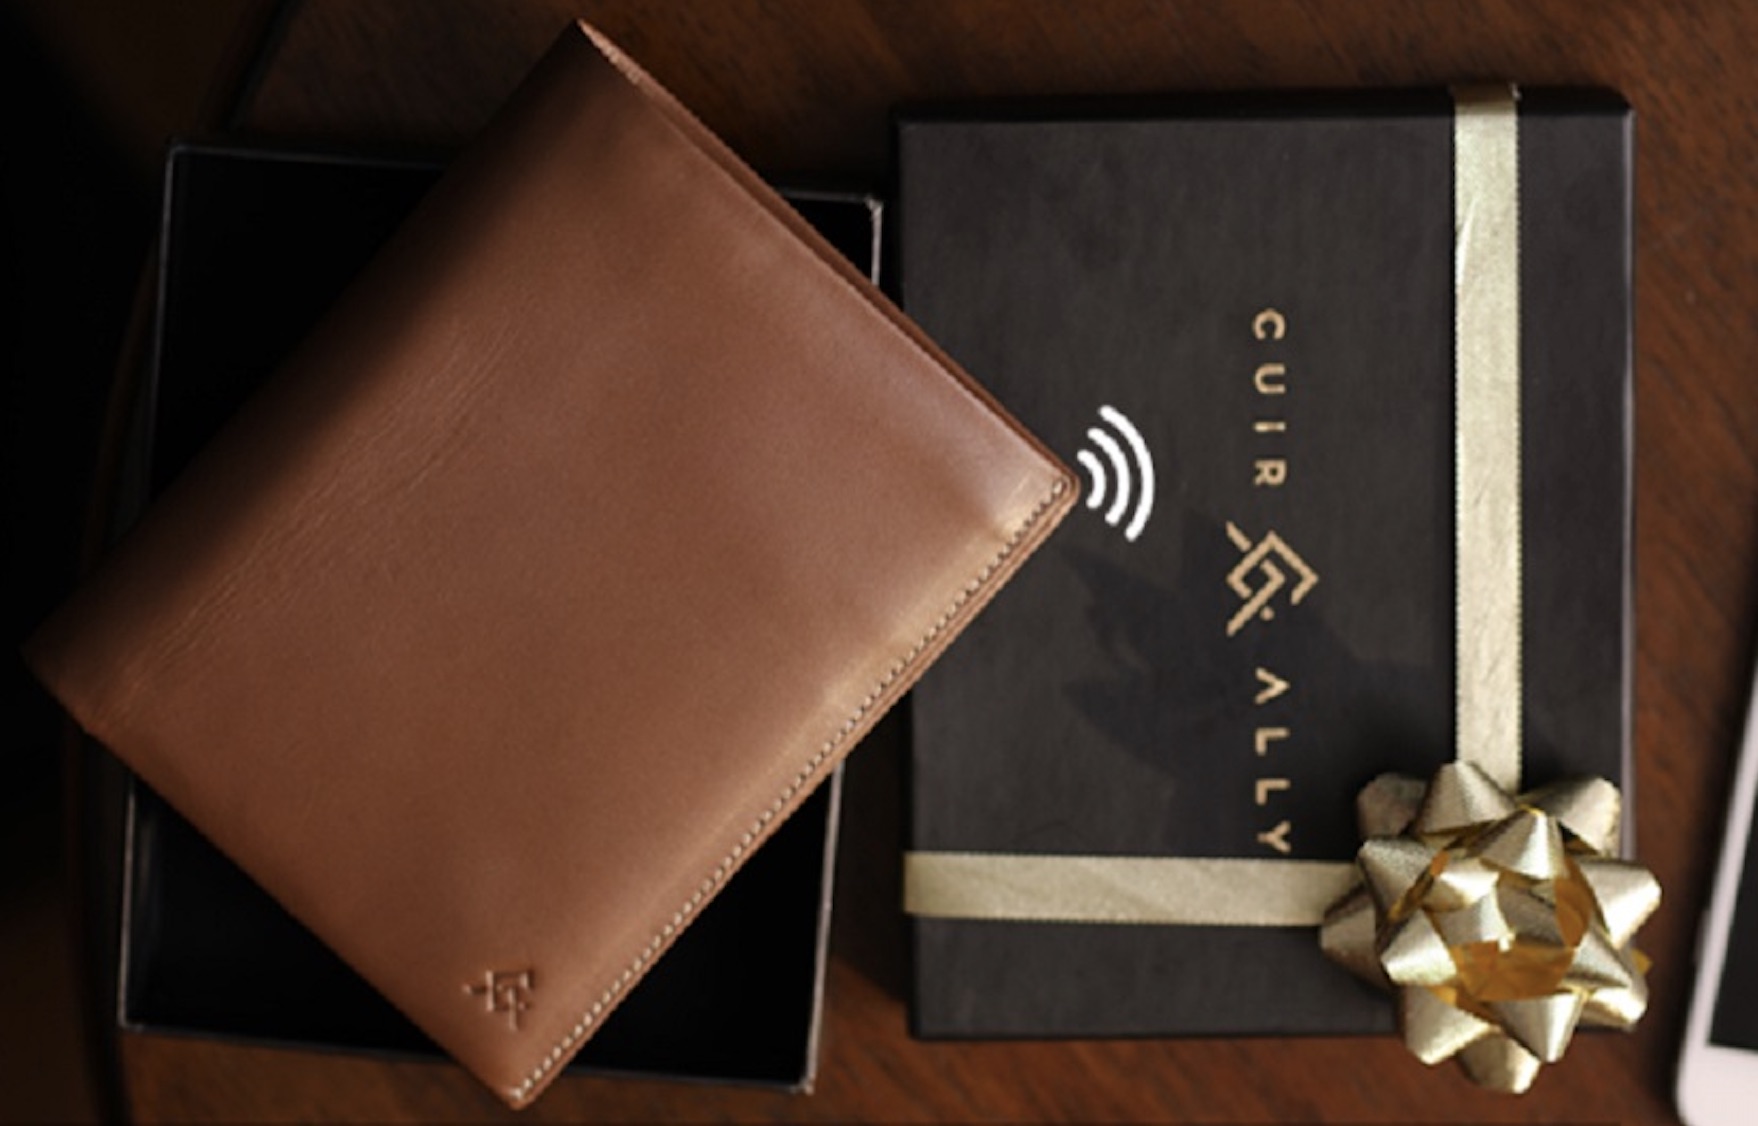 The Voyager Smart Wallet Will Ensure You Don't Lose It | Digital Trends